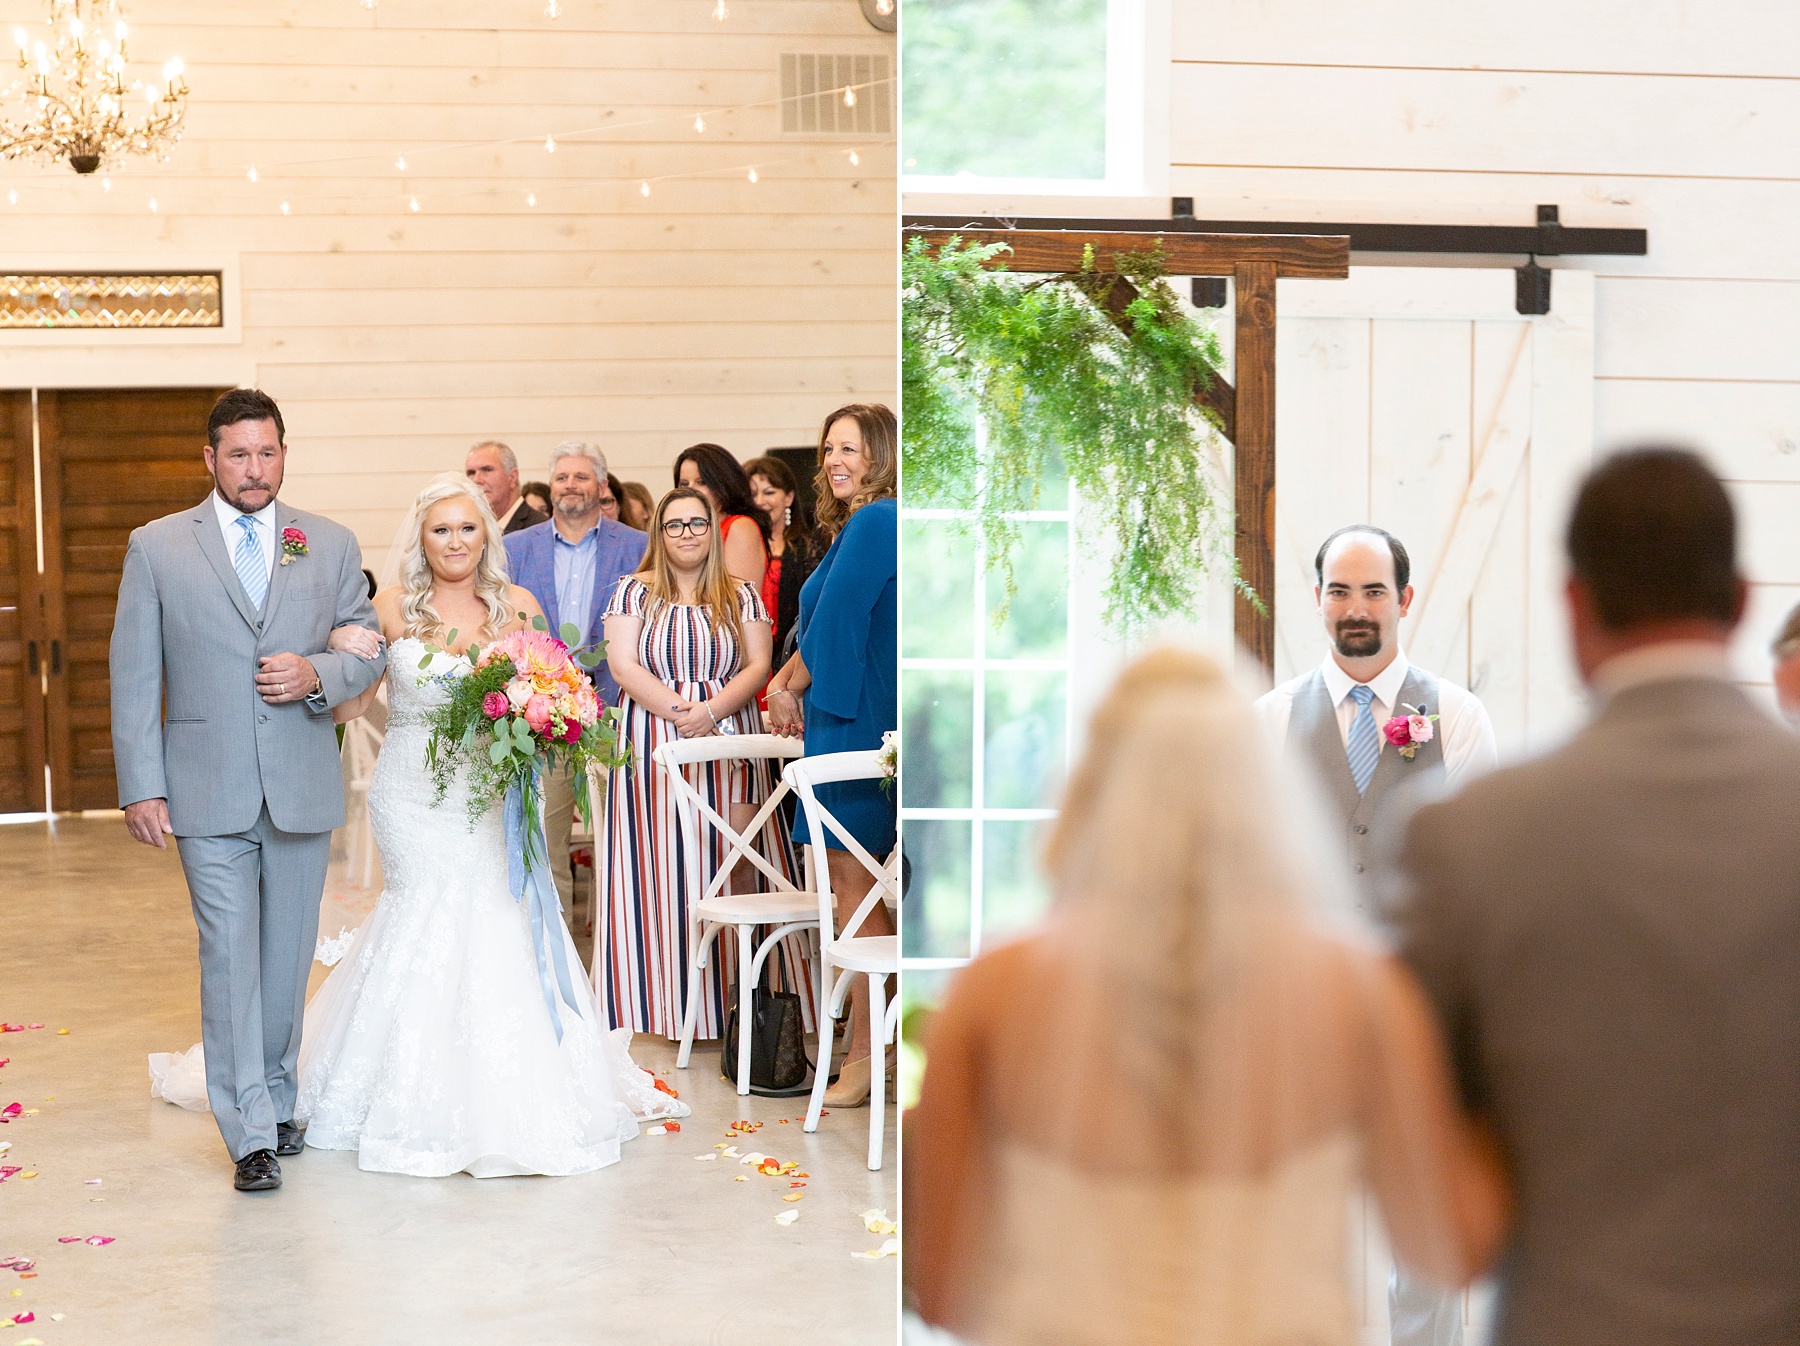 bride walks down aisle with father and groom's first look at bride photographed by Randi Michelle Weddings